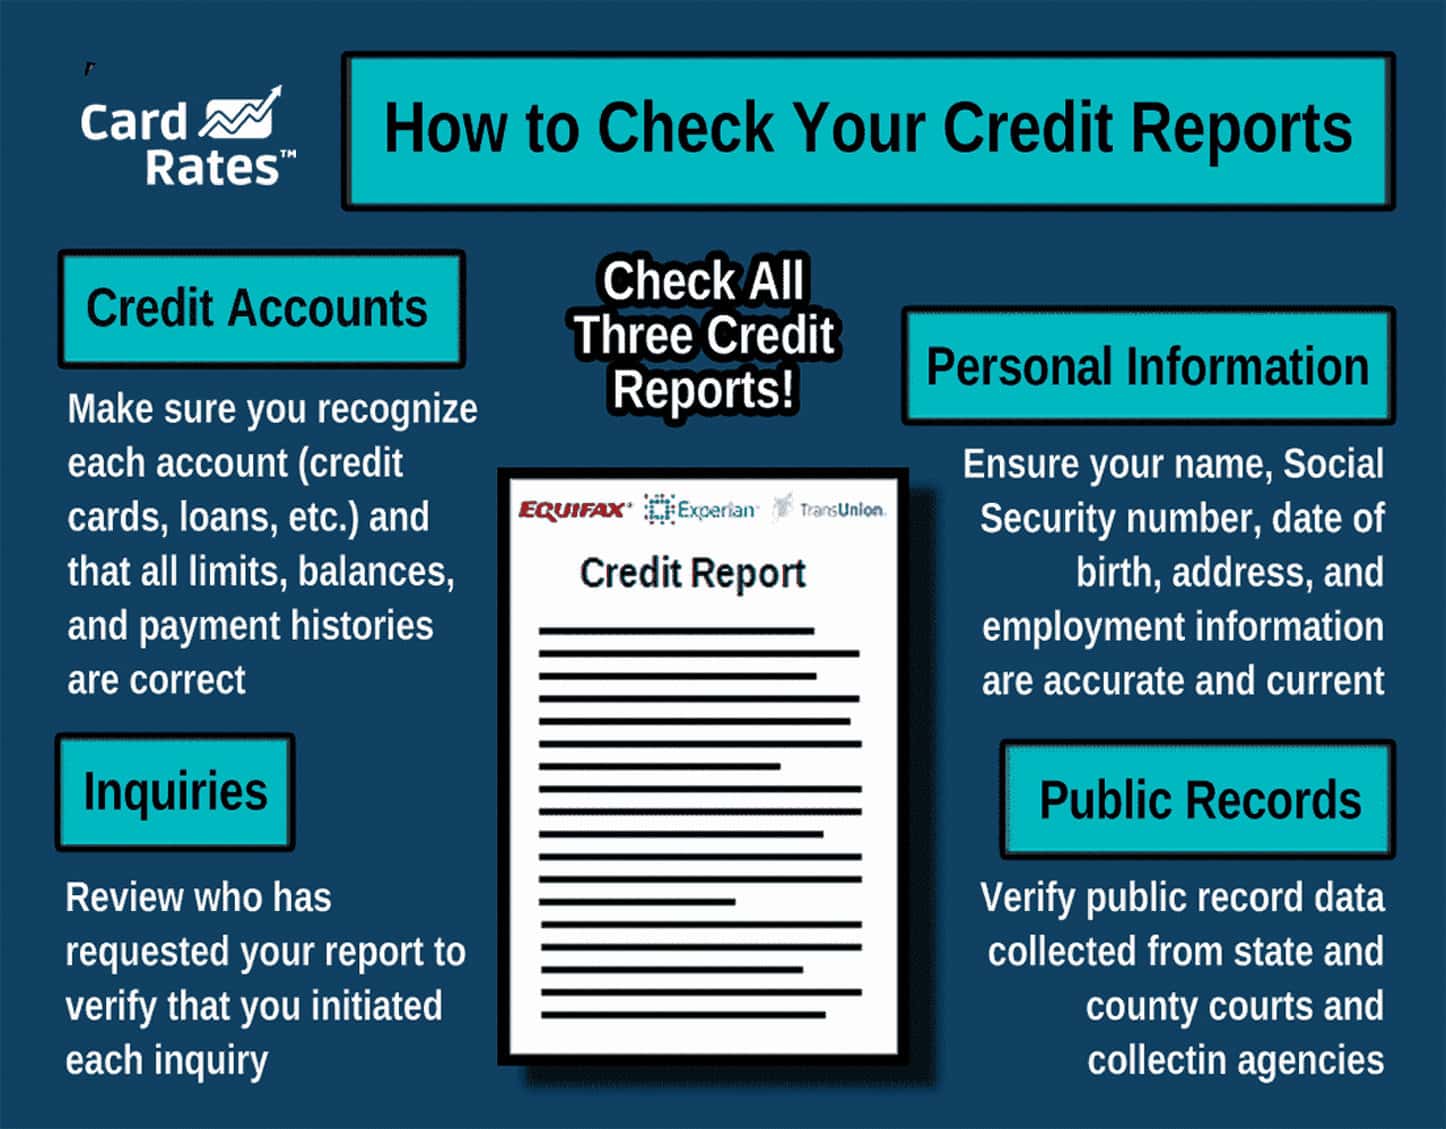 Instruction for checking your credit reports